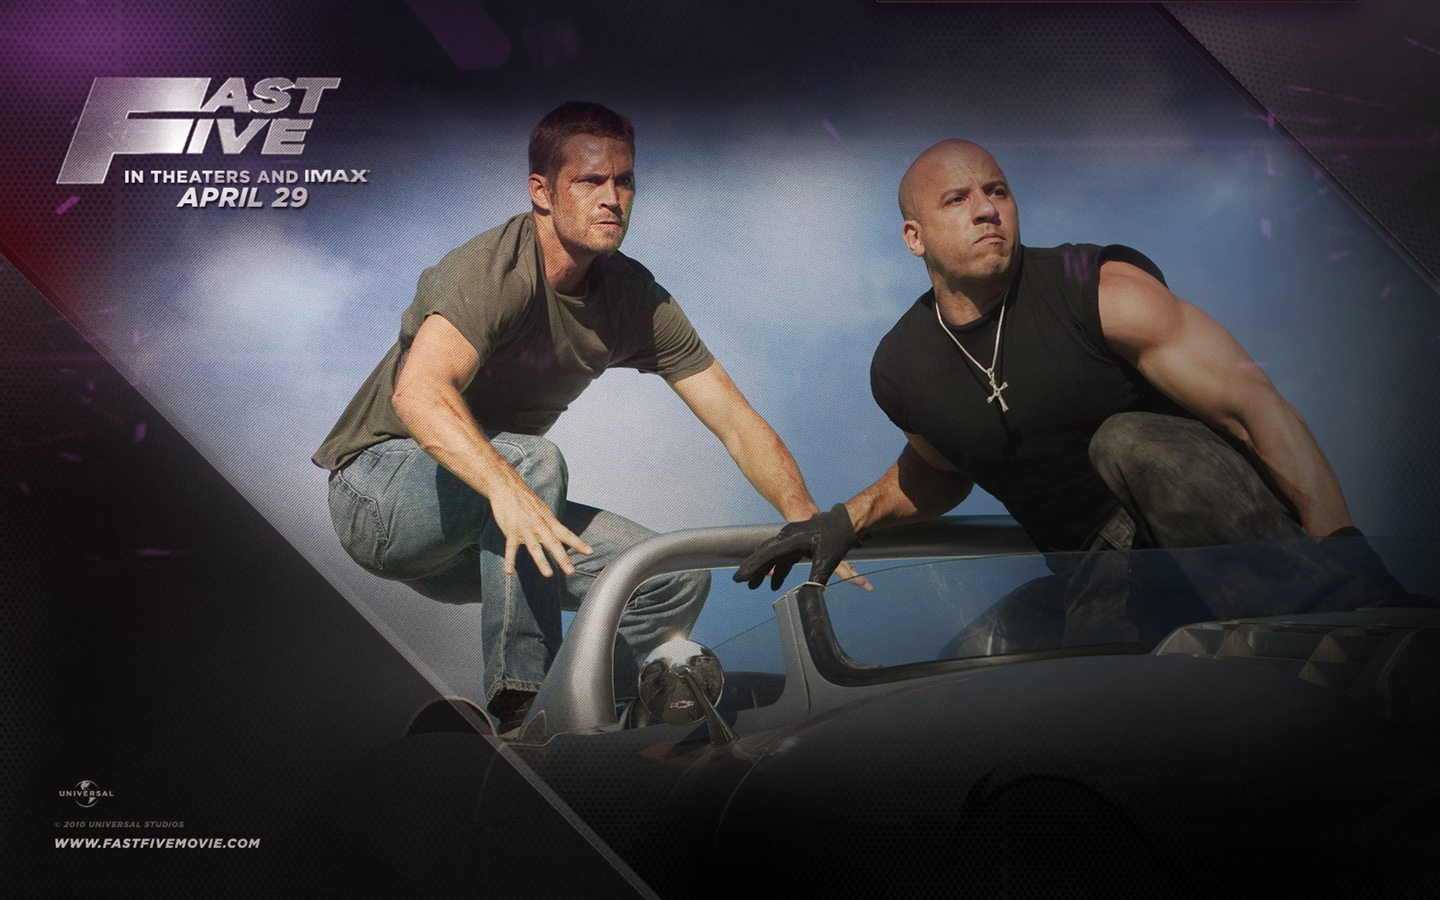 Fast Five wallpapers #6 - 1440x900